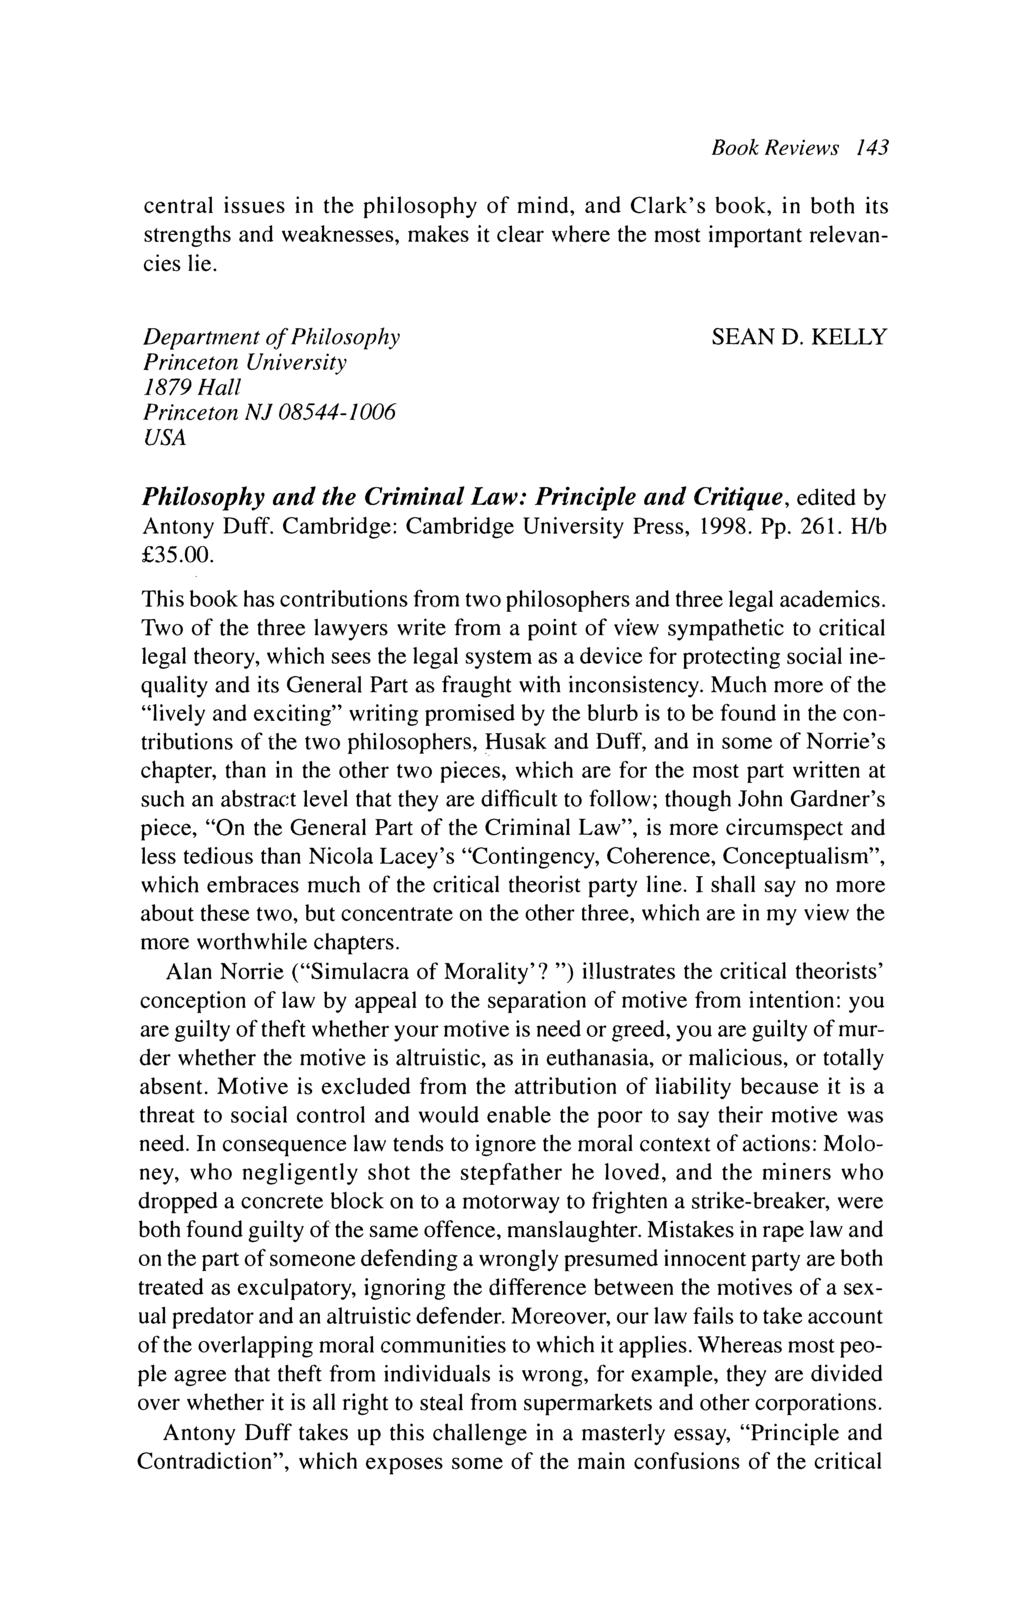 Book Reviews 143 central issues in the philosophy of mind, and Clark's book, in both its strengths and weaknesses, makes it clear where the most important relevancies lie.